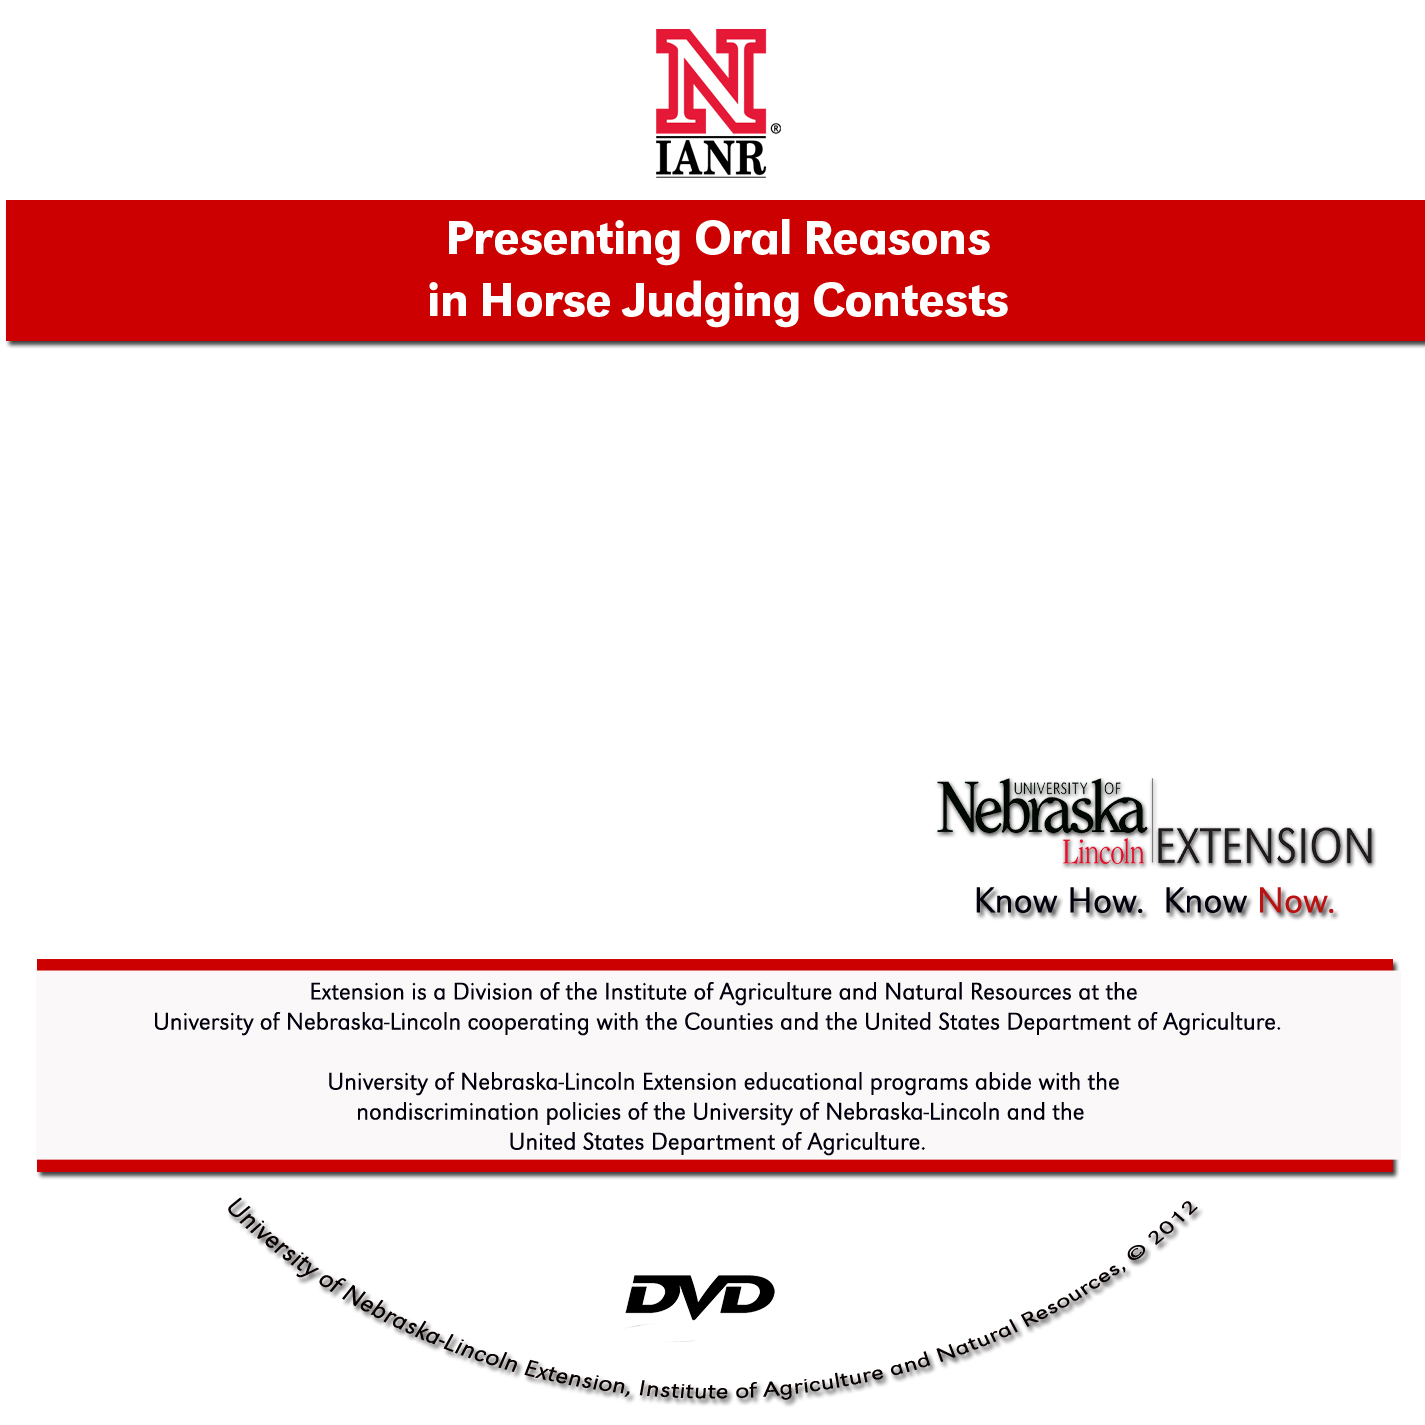 Presenting Oral Reasons for Horse Judging Contests [DVD]